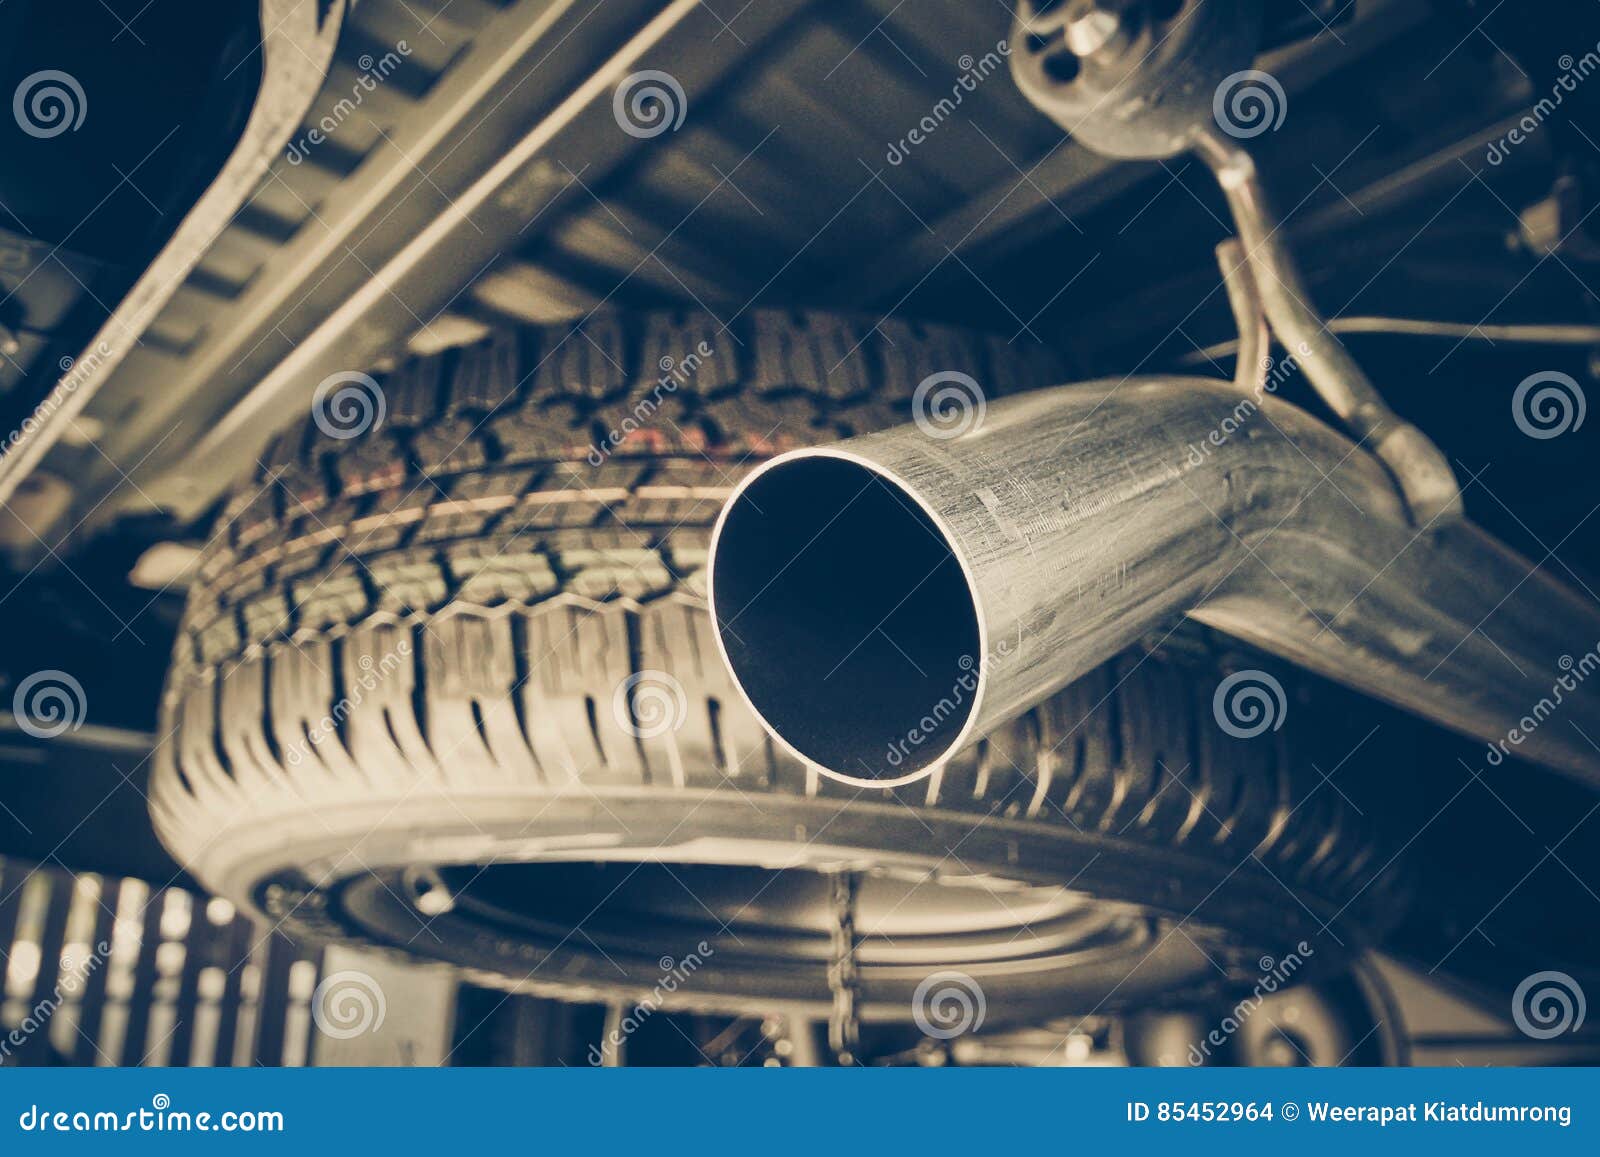 Exhaust pipe of a truck stock photo. Image of repair - 85452964